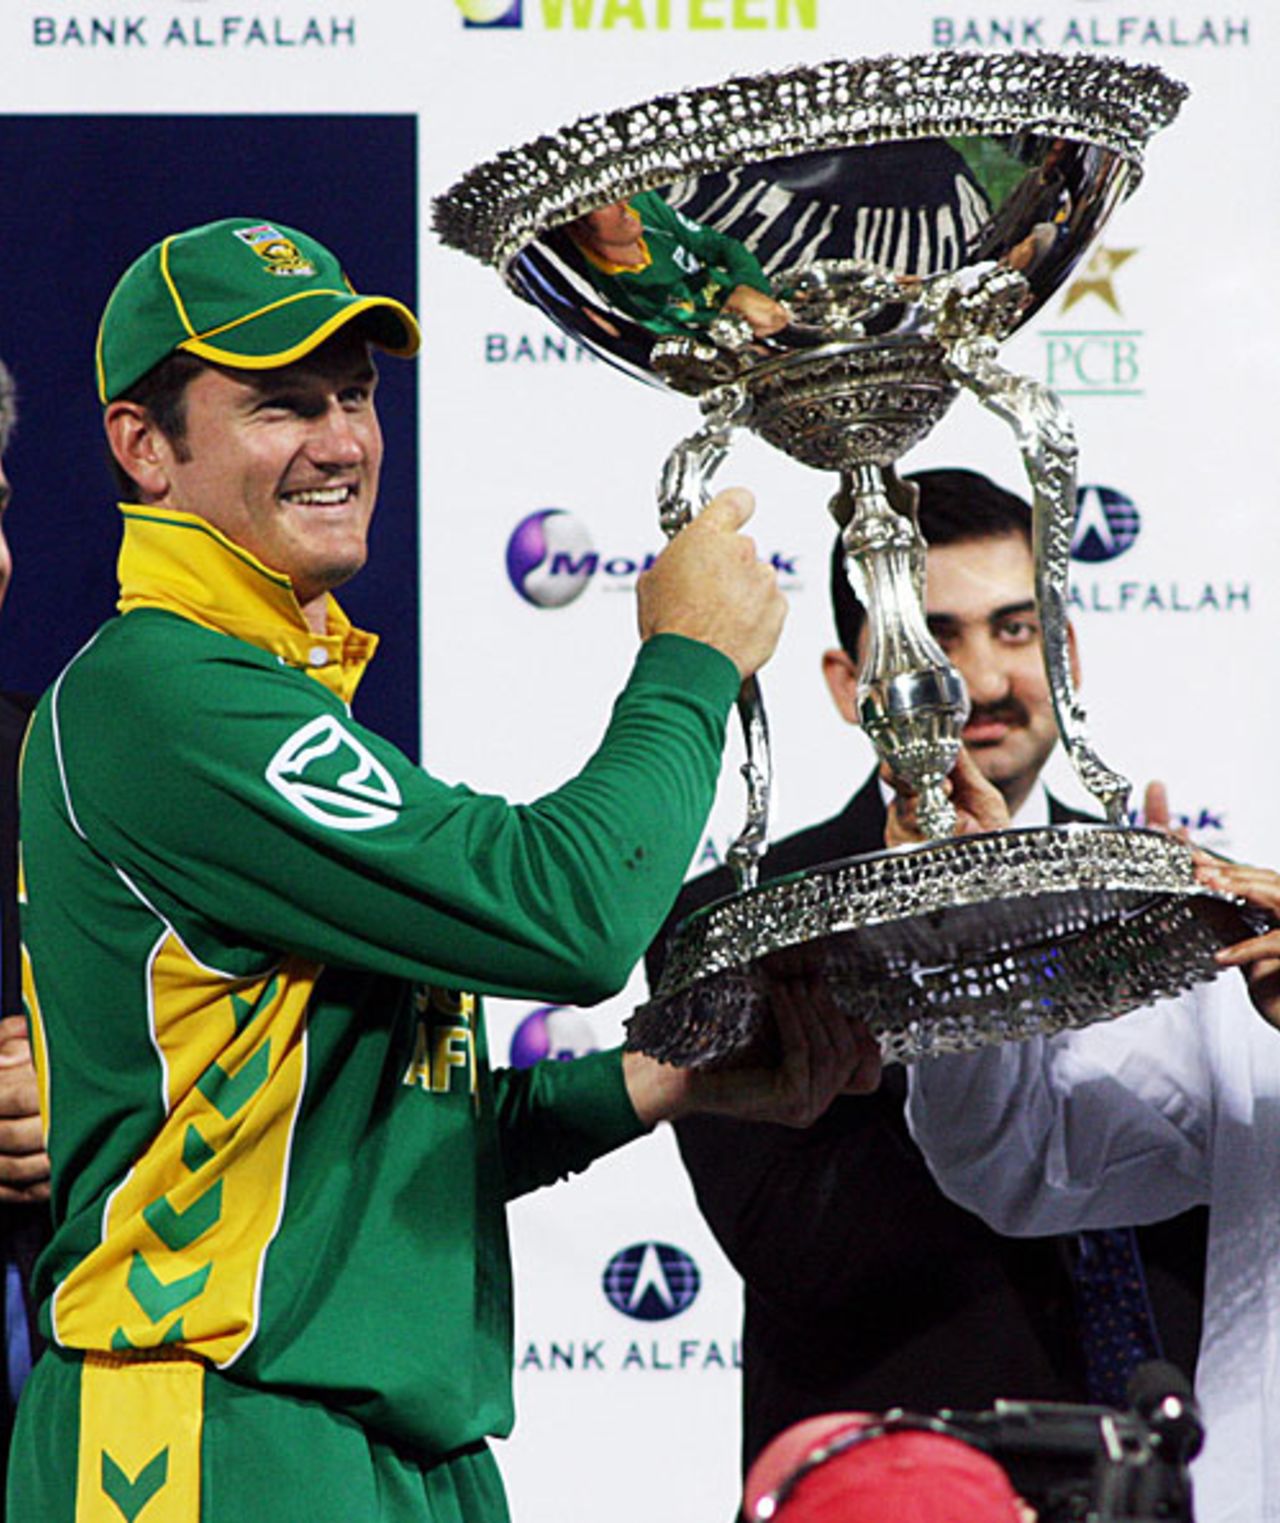 South Africa won the one-day series 3-2, Pakistan v South Africa, 5th ODI, Lahore, October 29, 2007